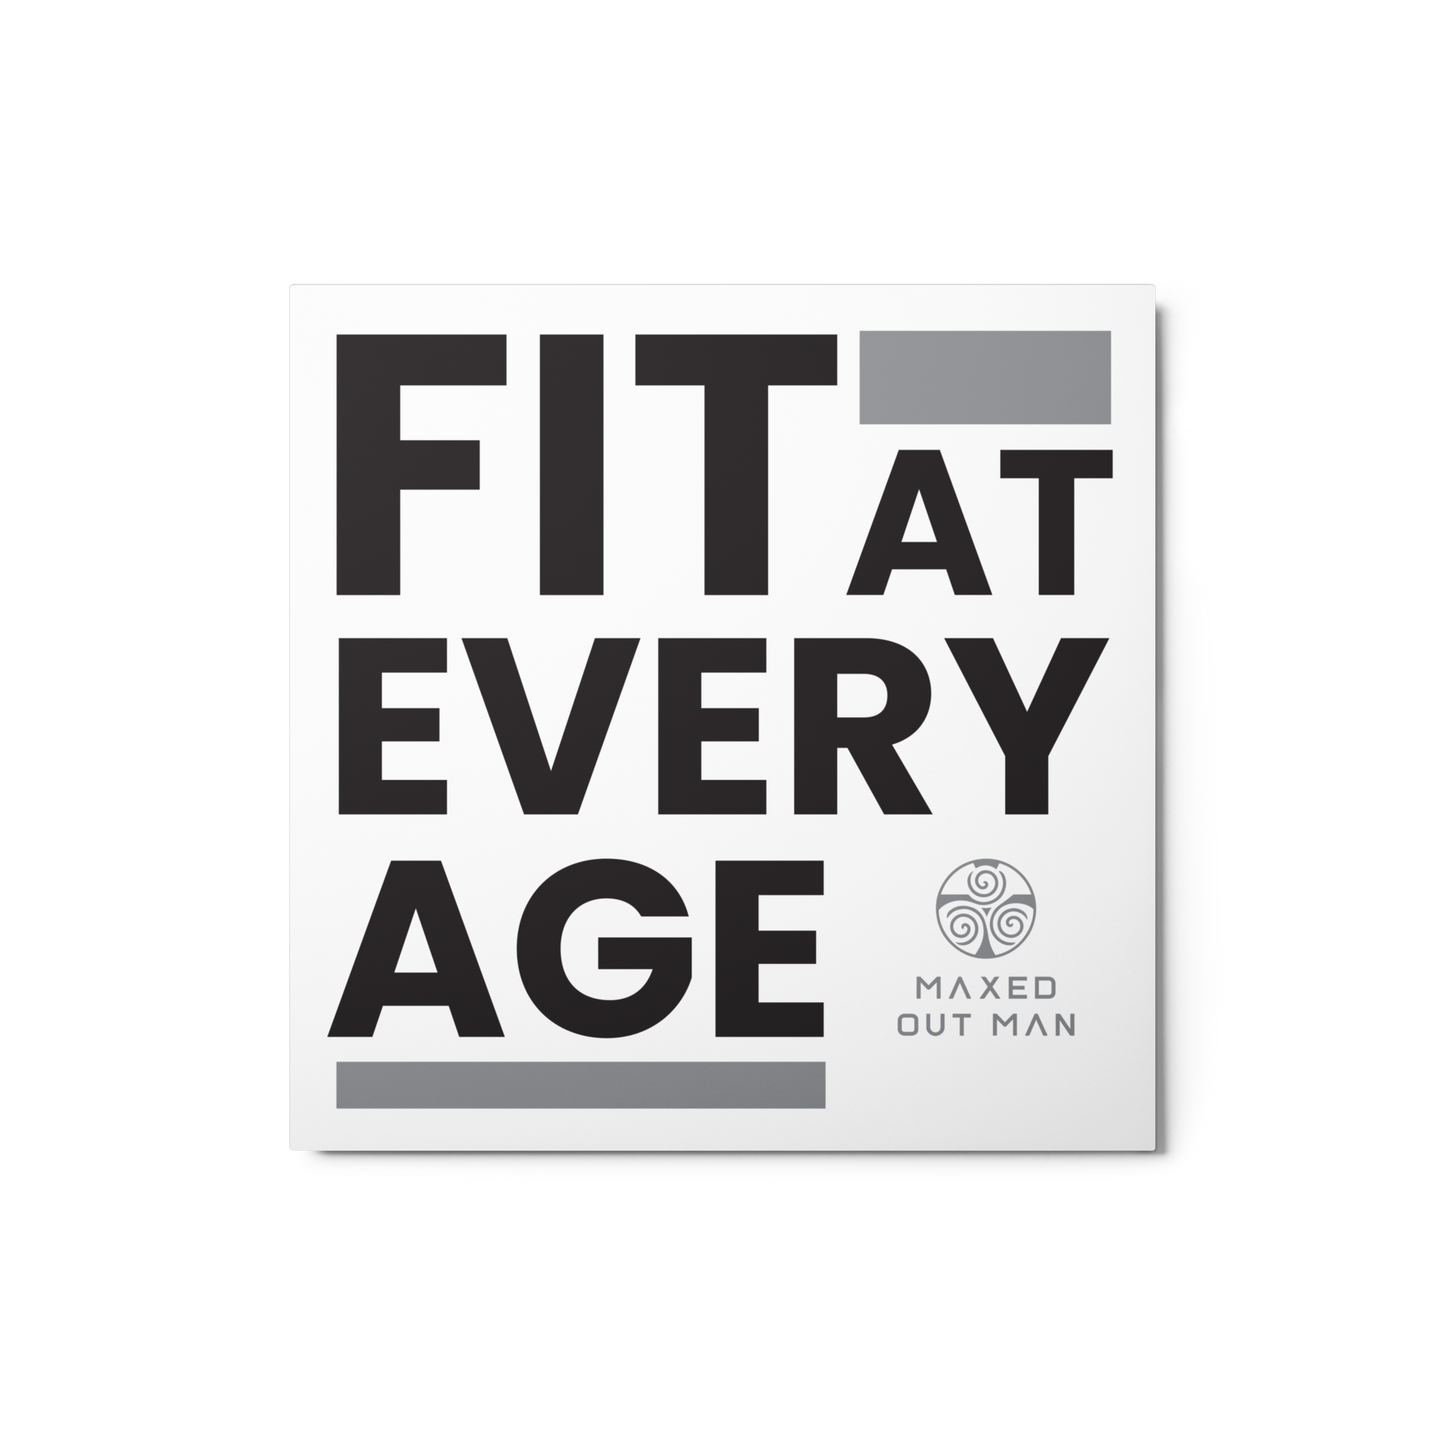 Fit at Every Age Metal Signs